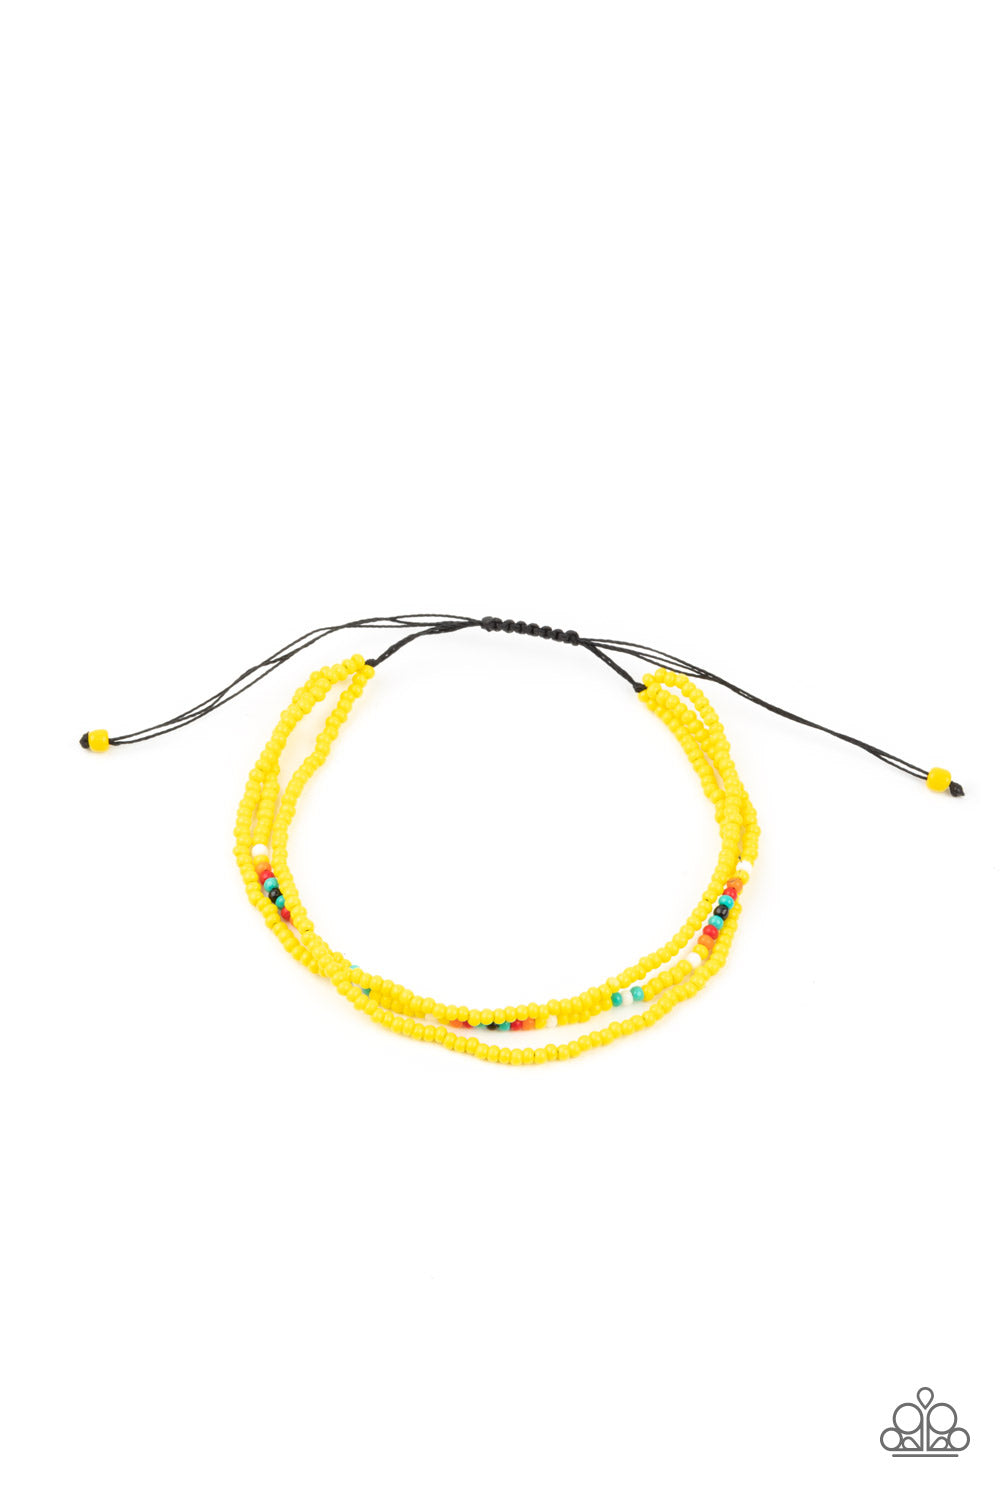 Two strands of dainty Illuminating seed beads, highlighted with a strand of brightly colored beads, form a simple accent around the wrist. Features an adjustable sliding knot closure.